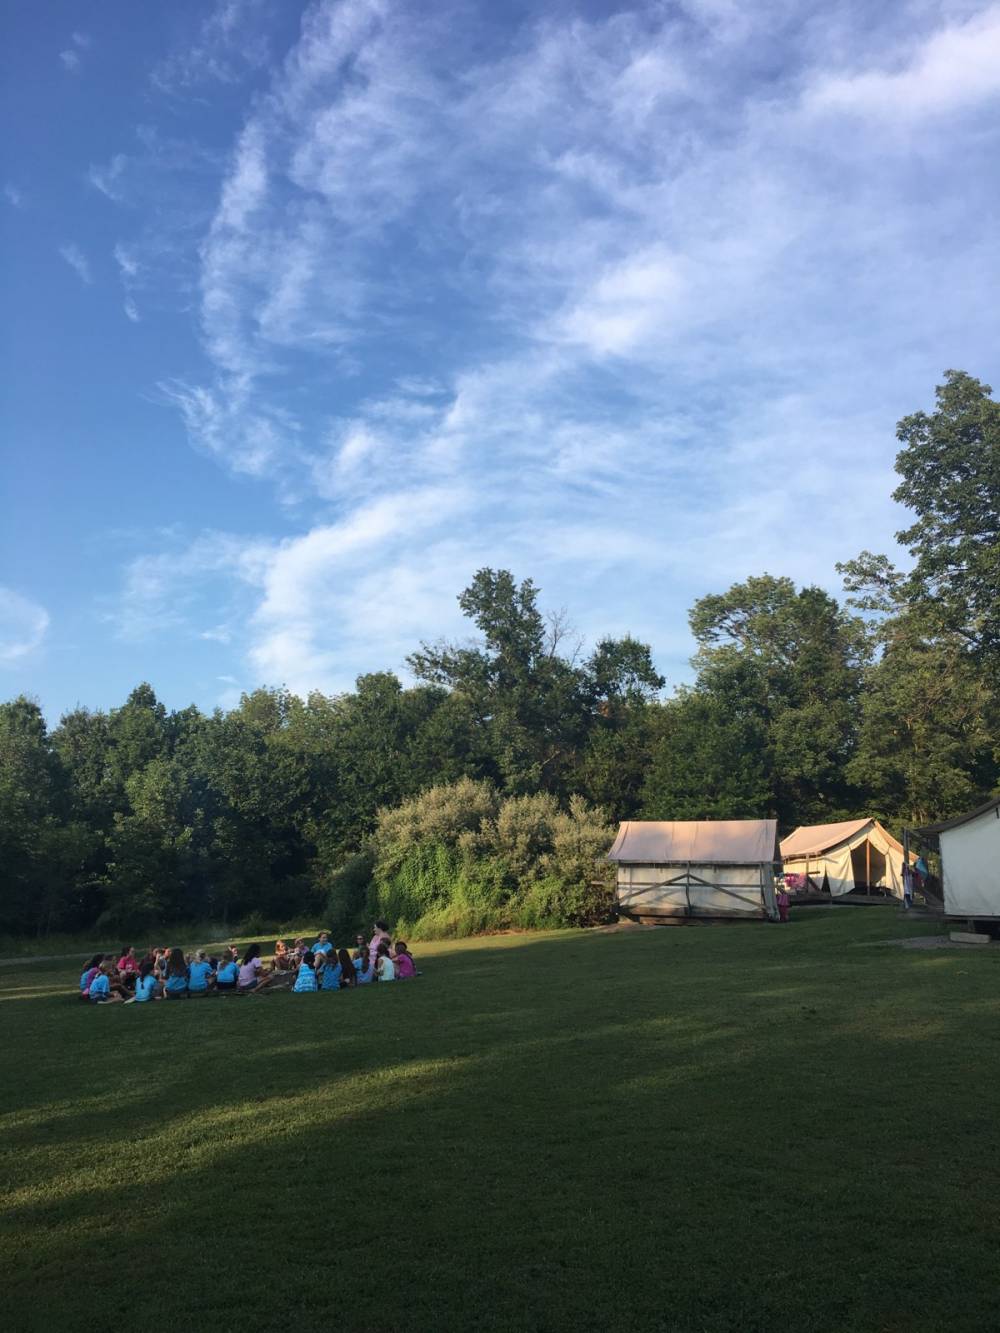 TOP NEW JERSEY SWIM CAMP: Camp Agnes DeWitt is a Top Swim Summer Camp located in Hillsborough New Jersey offering many fun and enriching Swim and other camp programs. Camp Agnes DeWitt also offers CIT/LIT and/or Teen Leadership Opportunities, too.